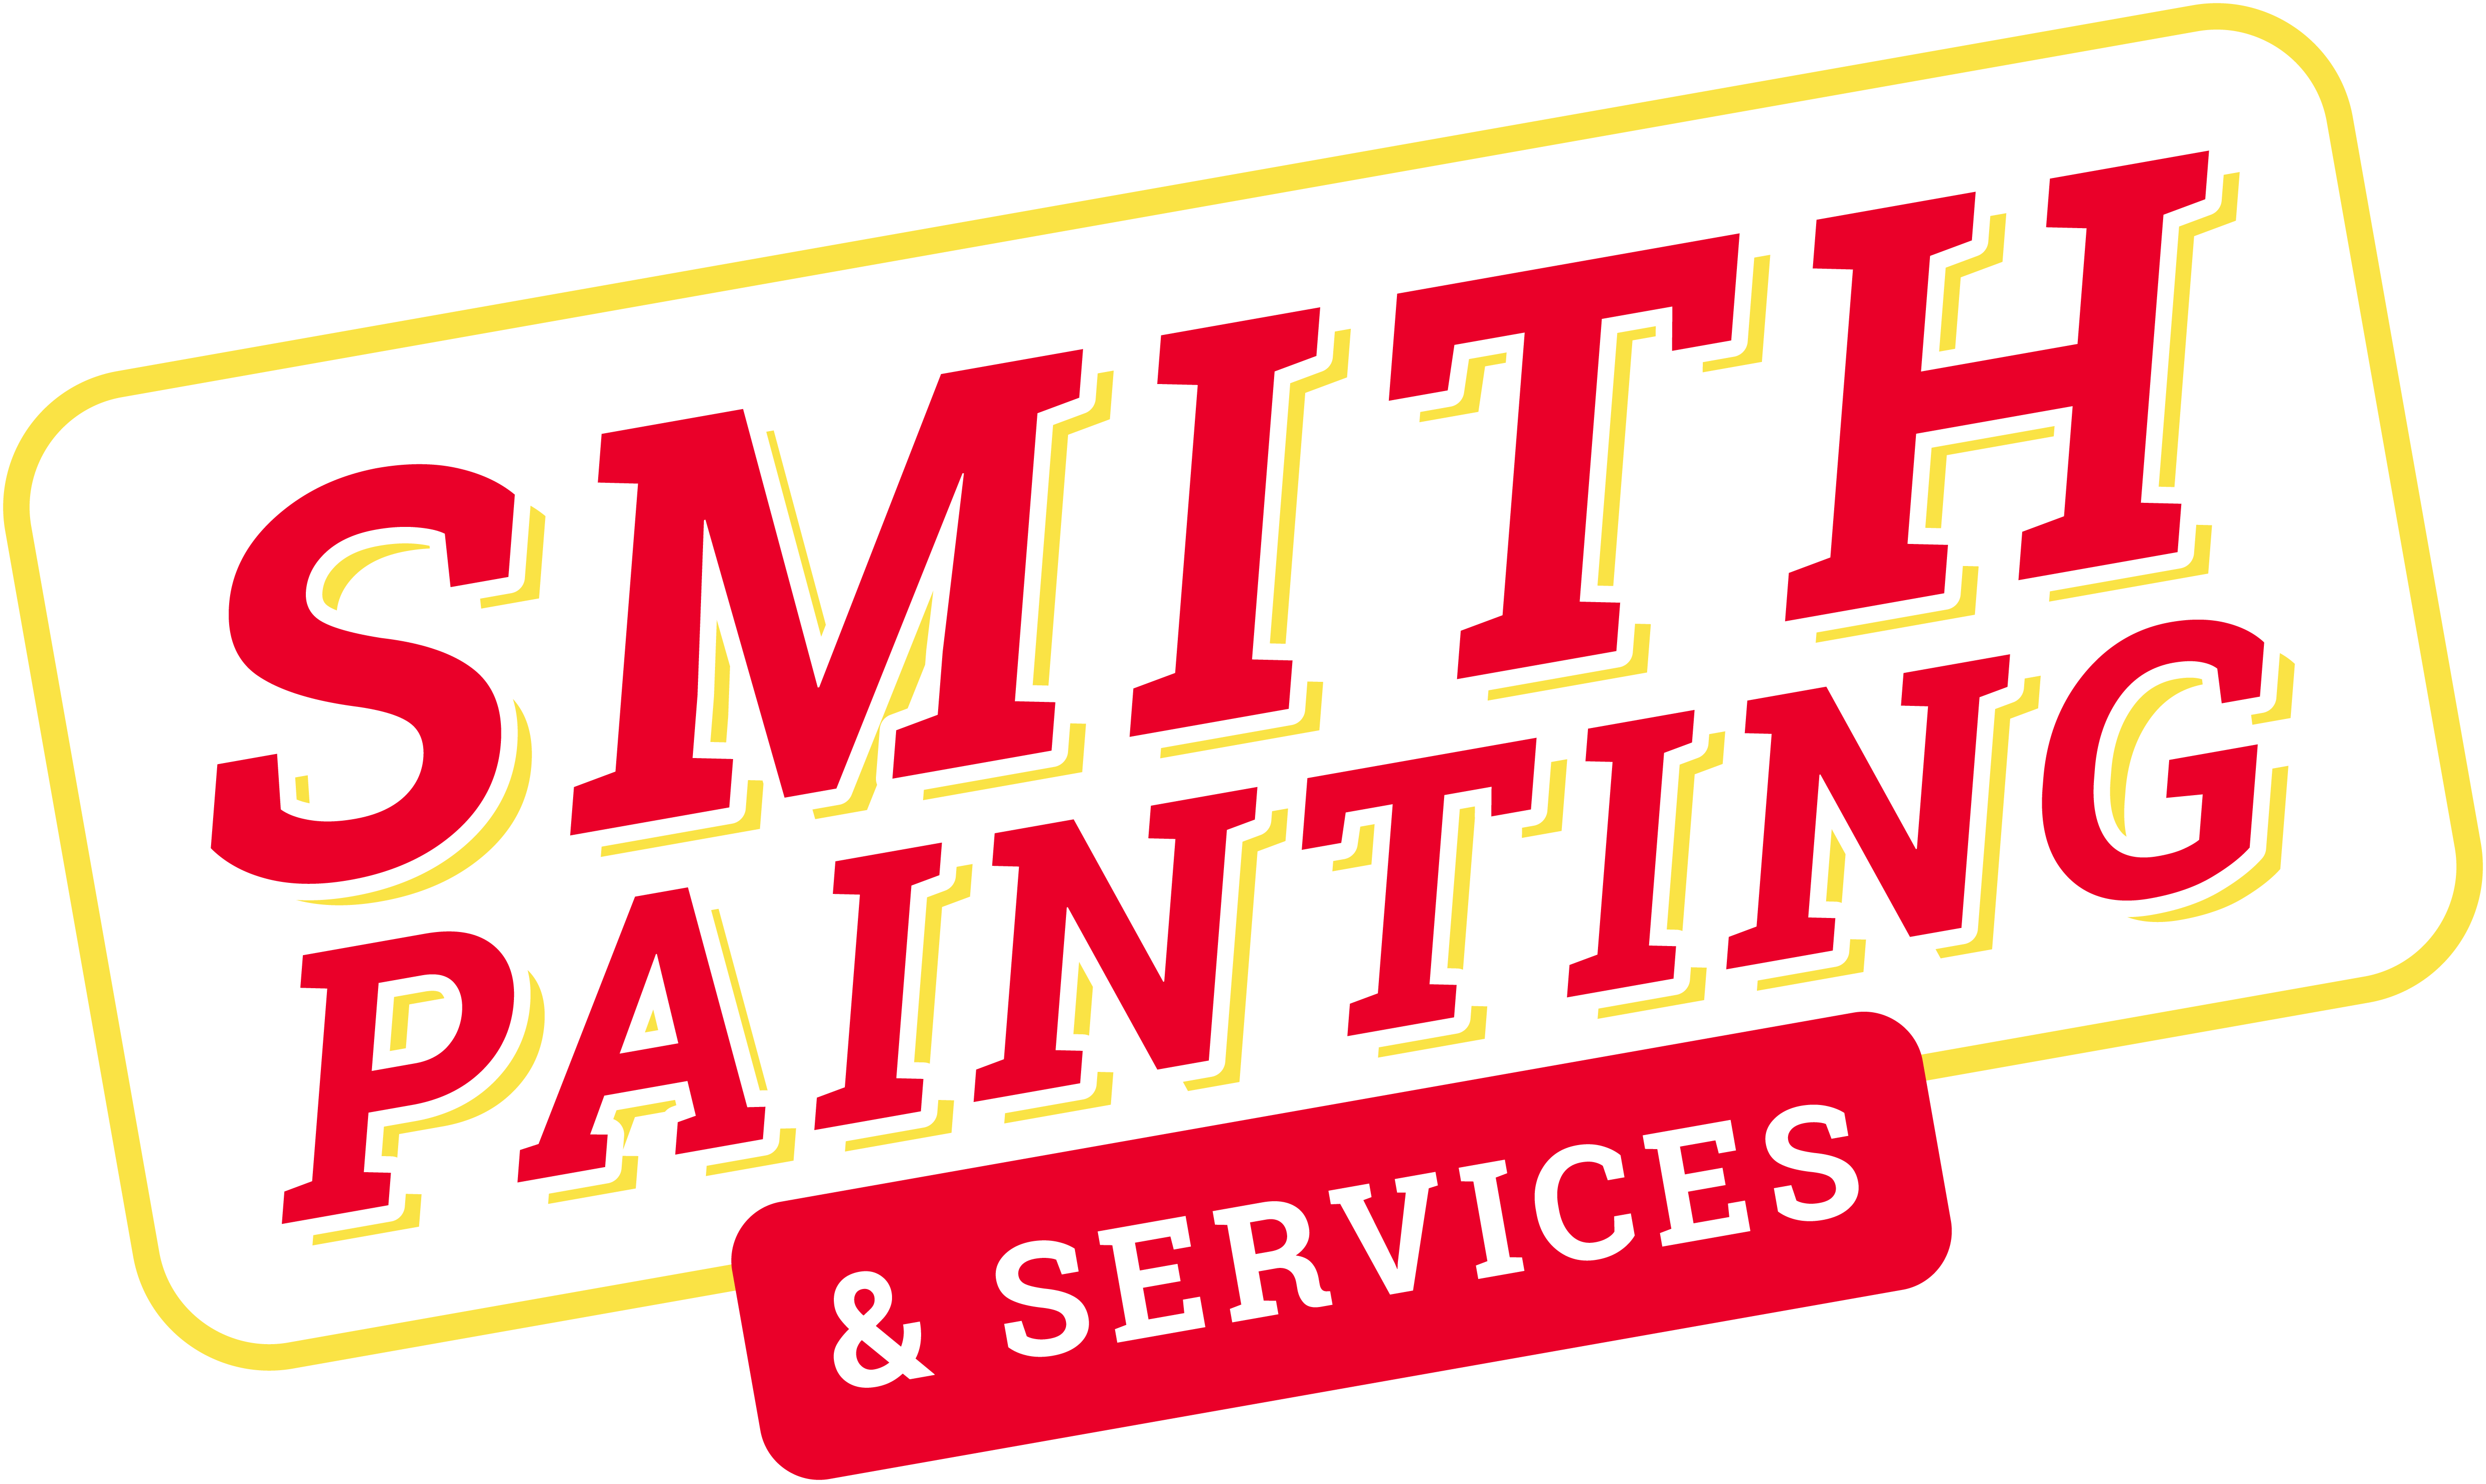 Smith Painting & Services Logo